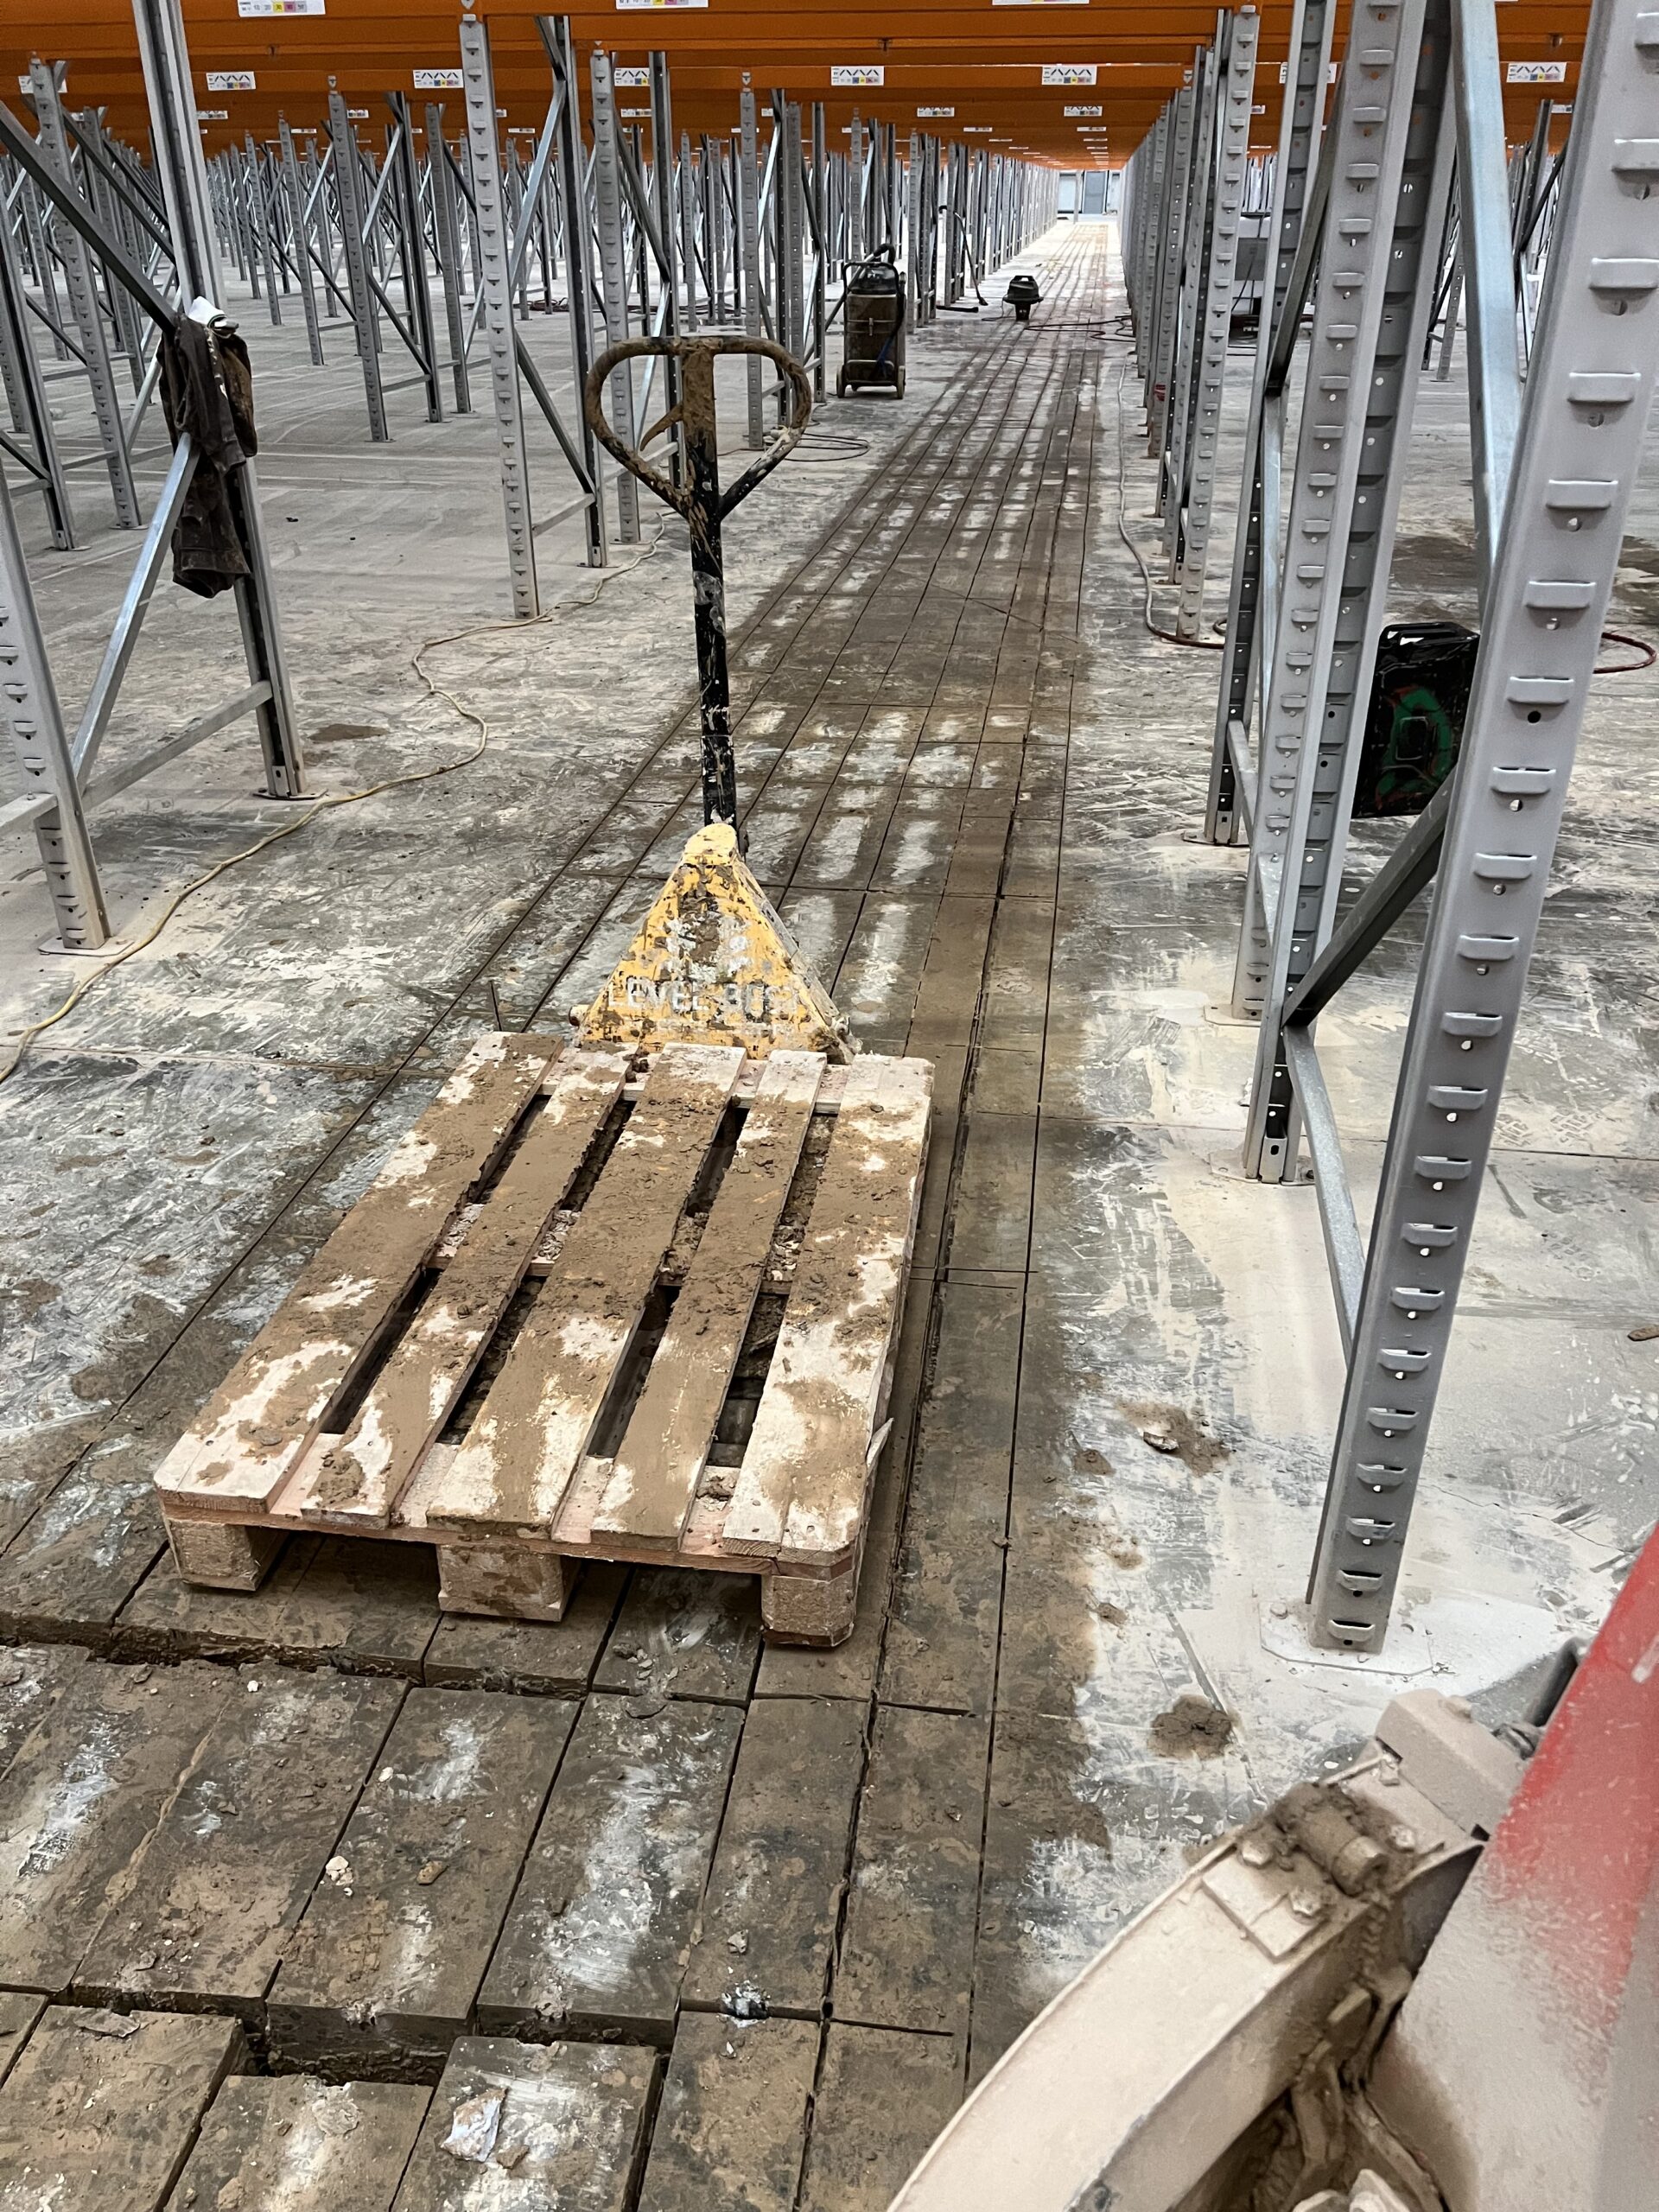 The concrete was cut into very small sections and lifted out with the pallet ruck as we had to work underneath and around the racking system, without damaging it